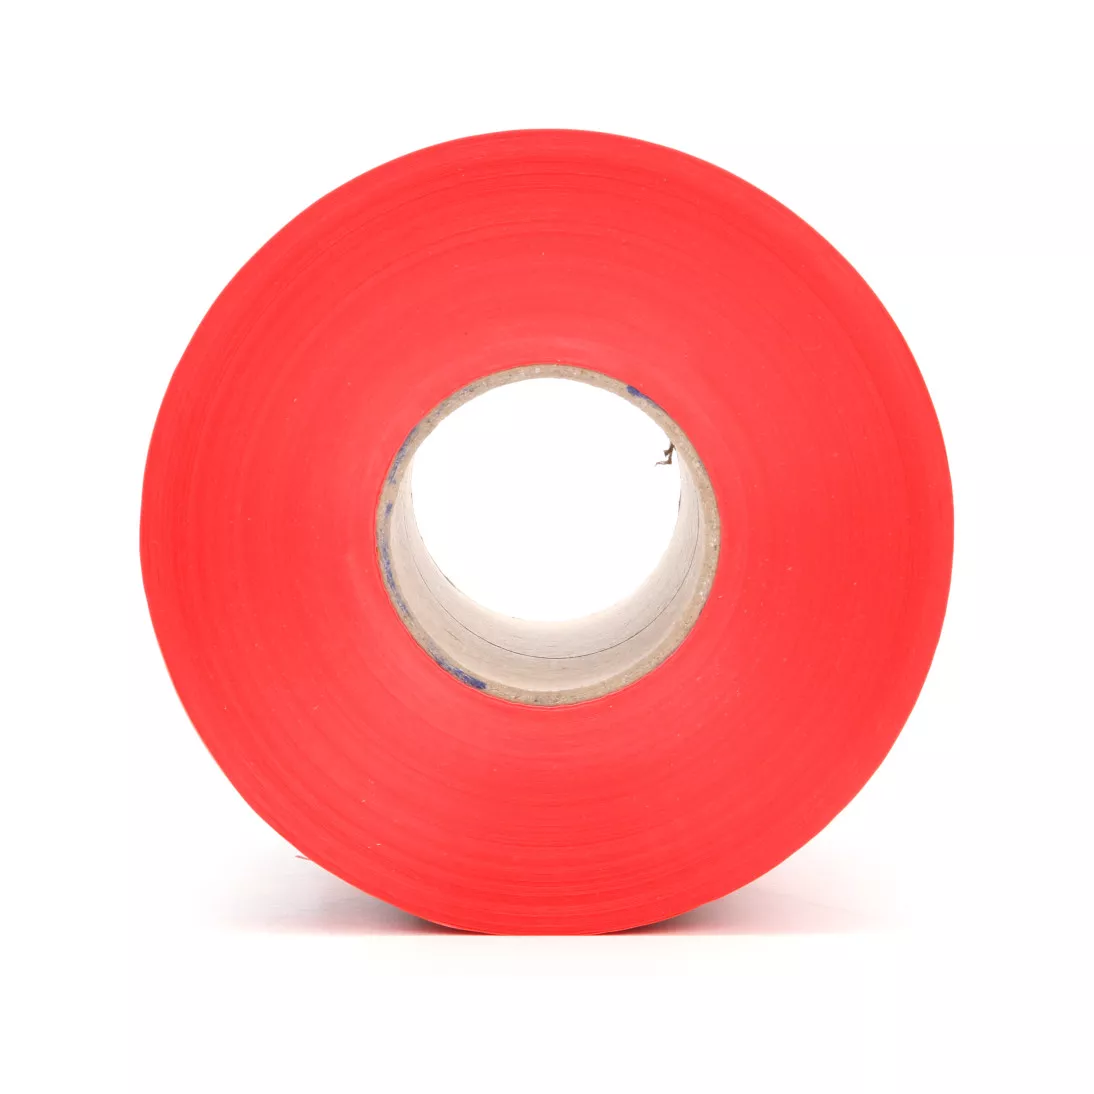 Scotch® Buried Barricade Tape 368, CAUTION BURIED ELECTRIC LINE BELOW, 6
in x 1000 ft, Red, 4 rolls/Case